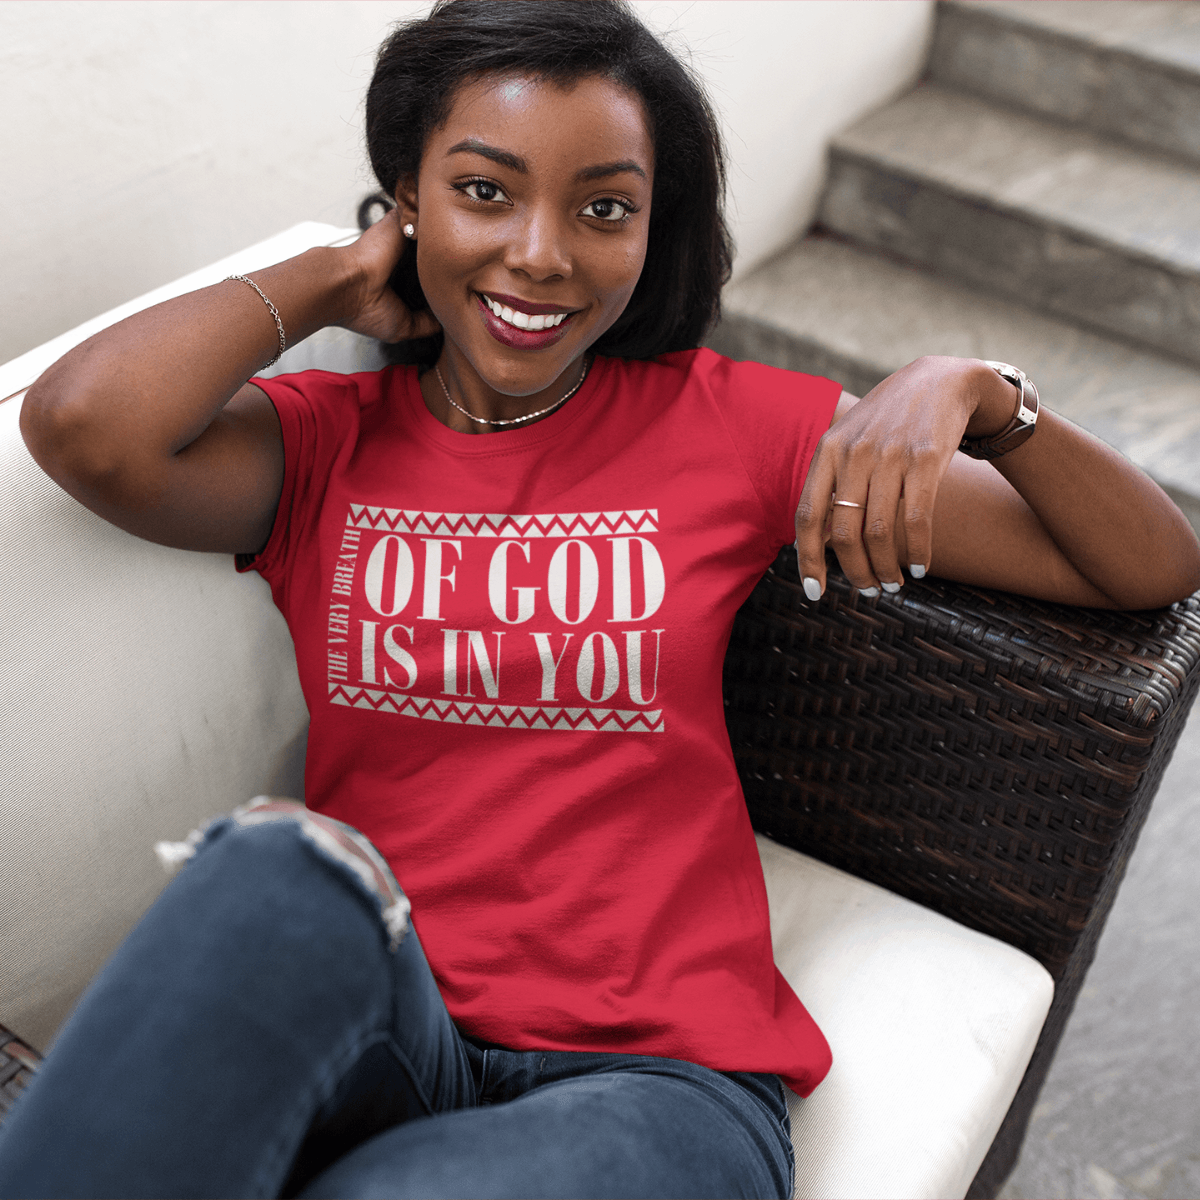 The Very Breath of GOD Is In You - Unisex T-Shirt - The Imperial